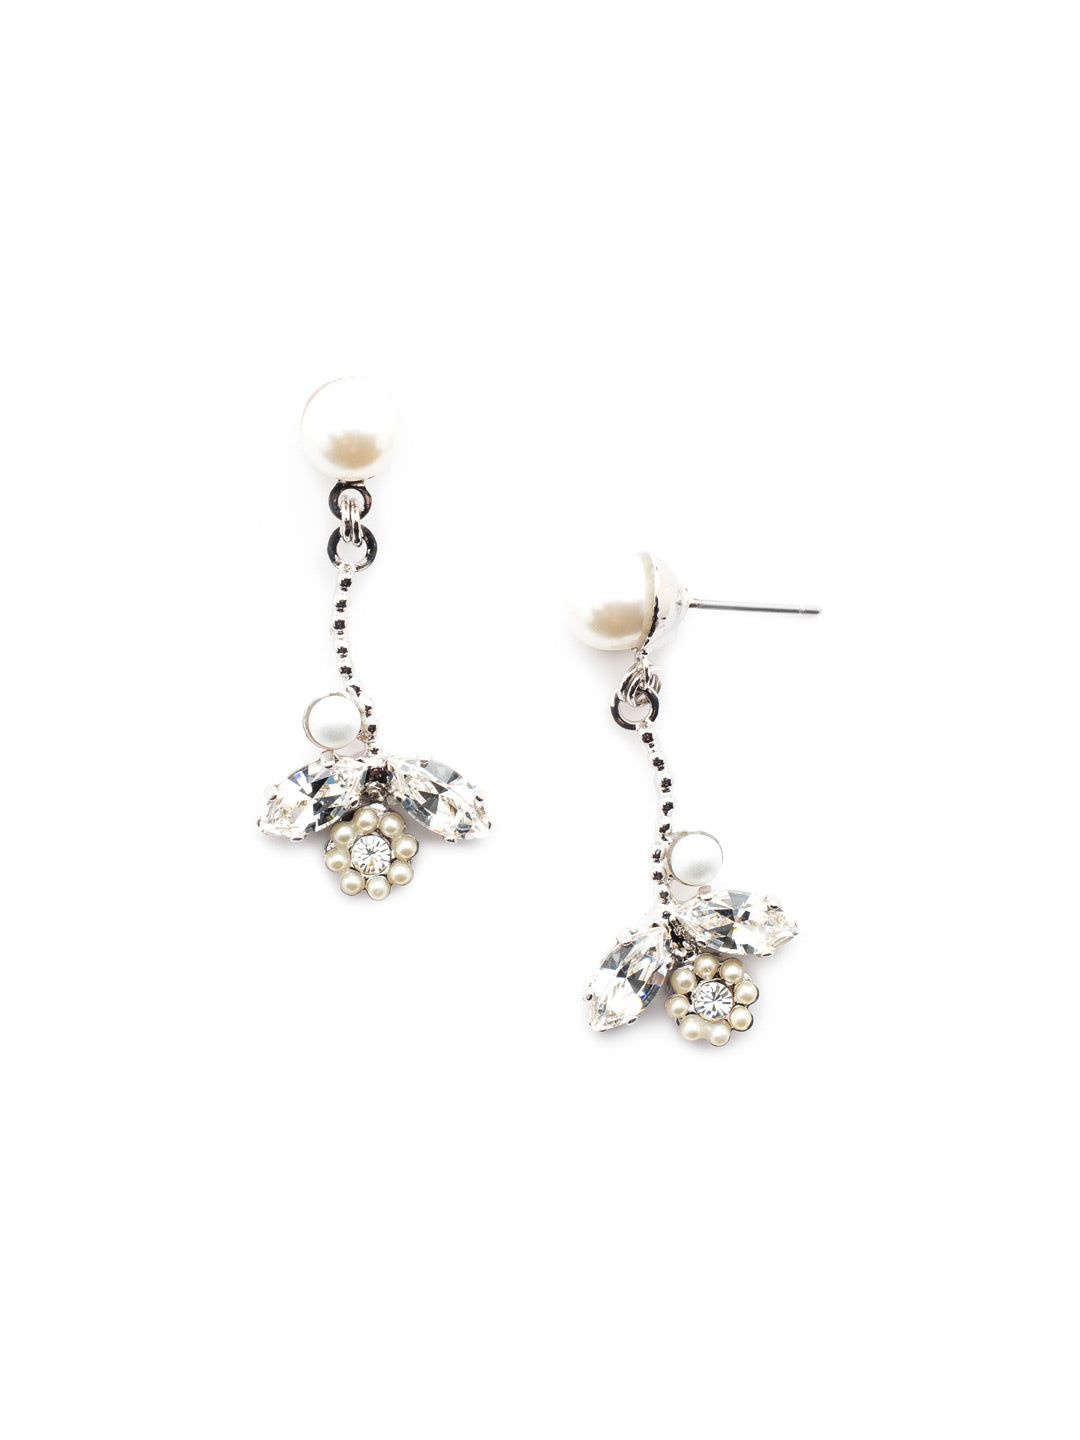 Mckinley Dangle Earrings - EET96RHMDP - <p>Three beautiful crystals hang delicately from a pearl stud. From Sorrelli's Modern Pearl collection in our Palladium Silver-tone finish.</p>